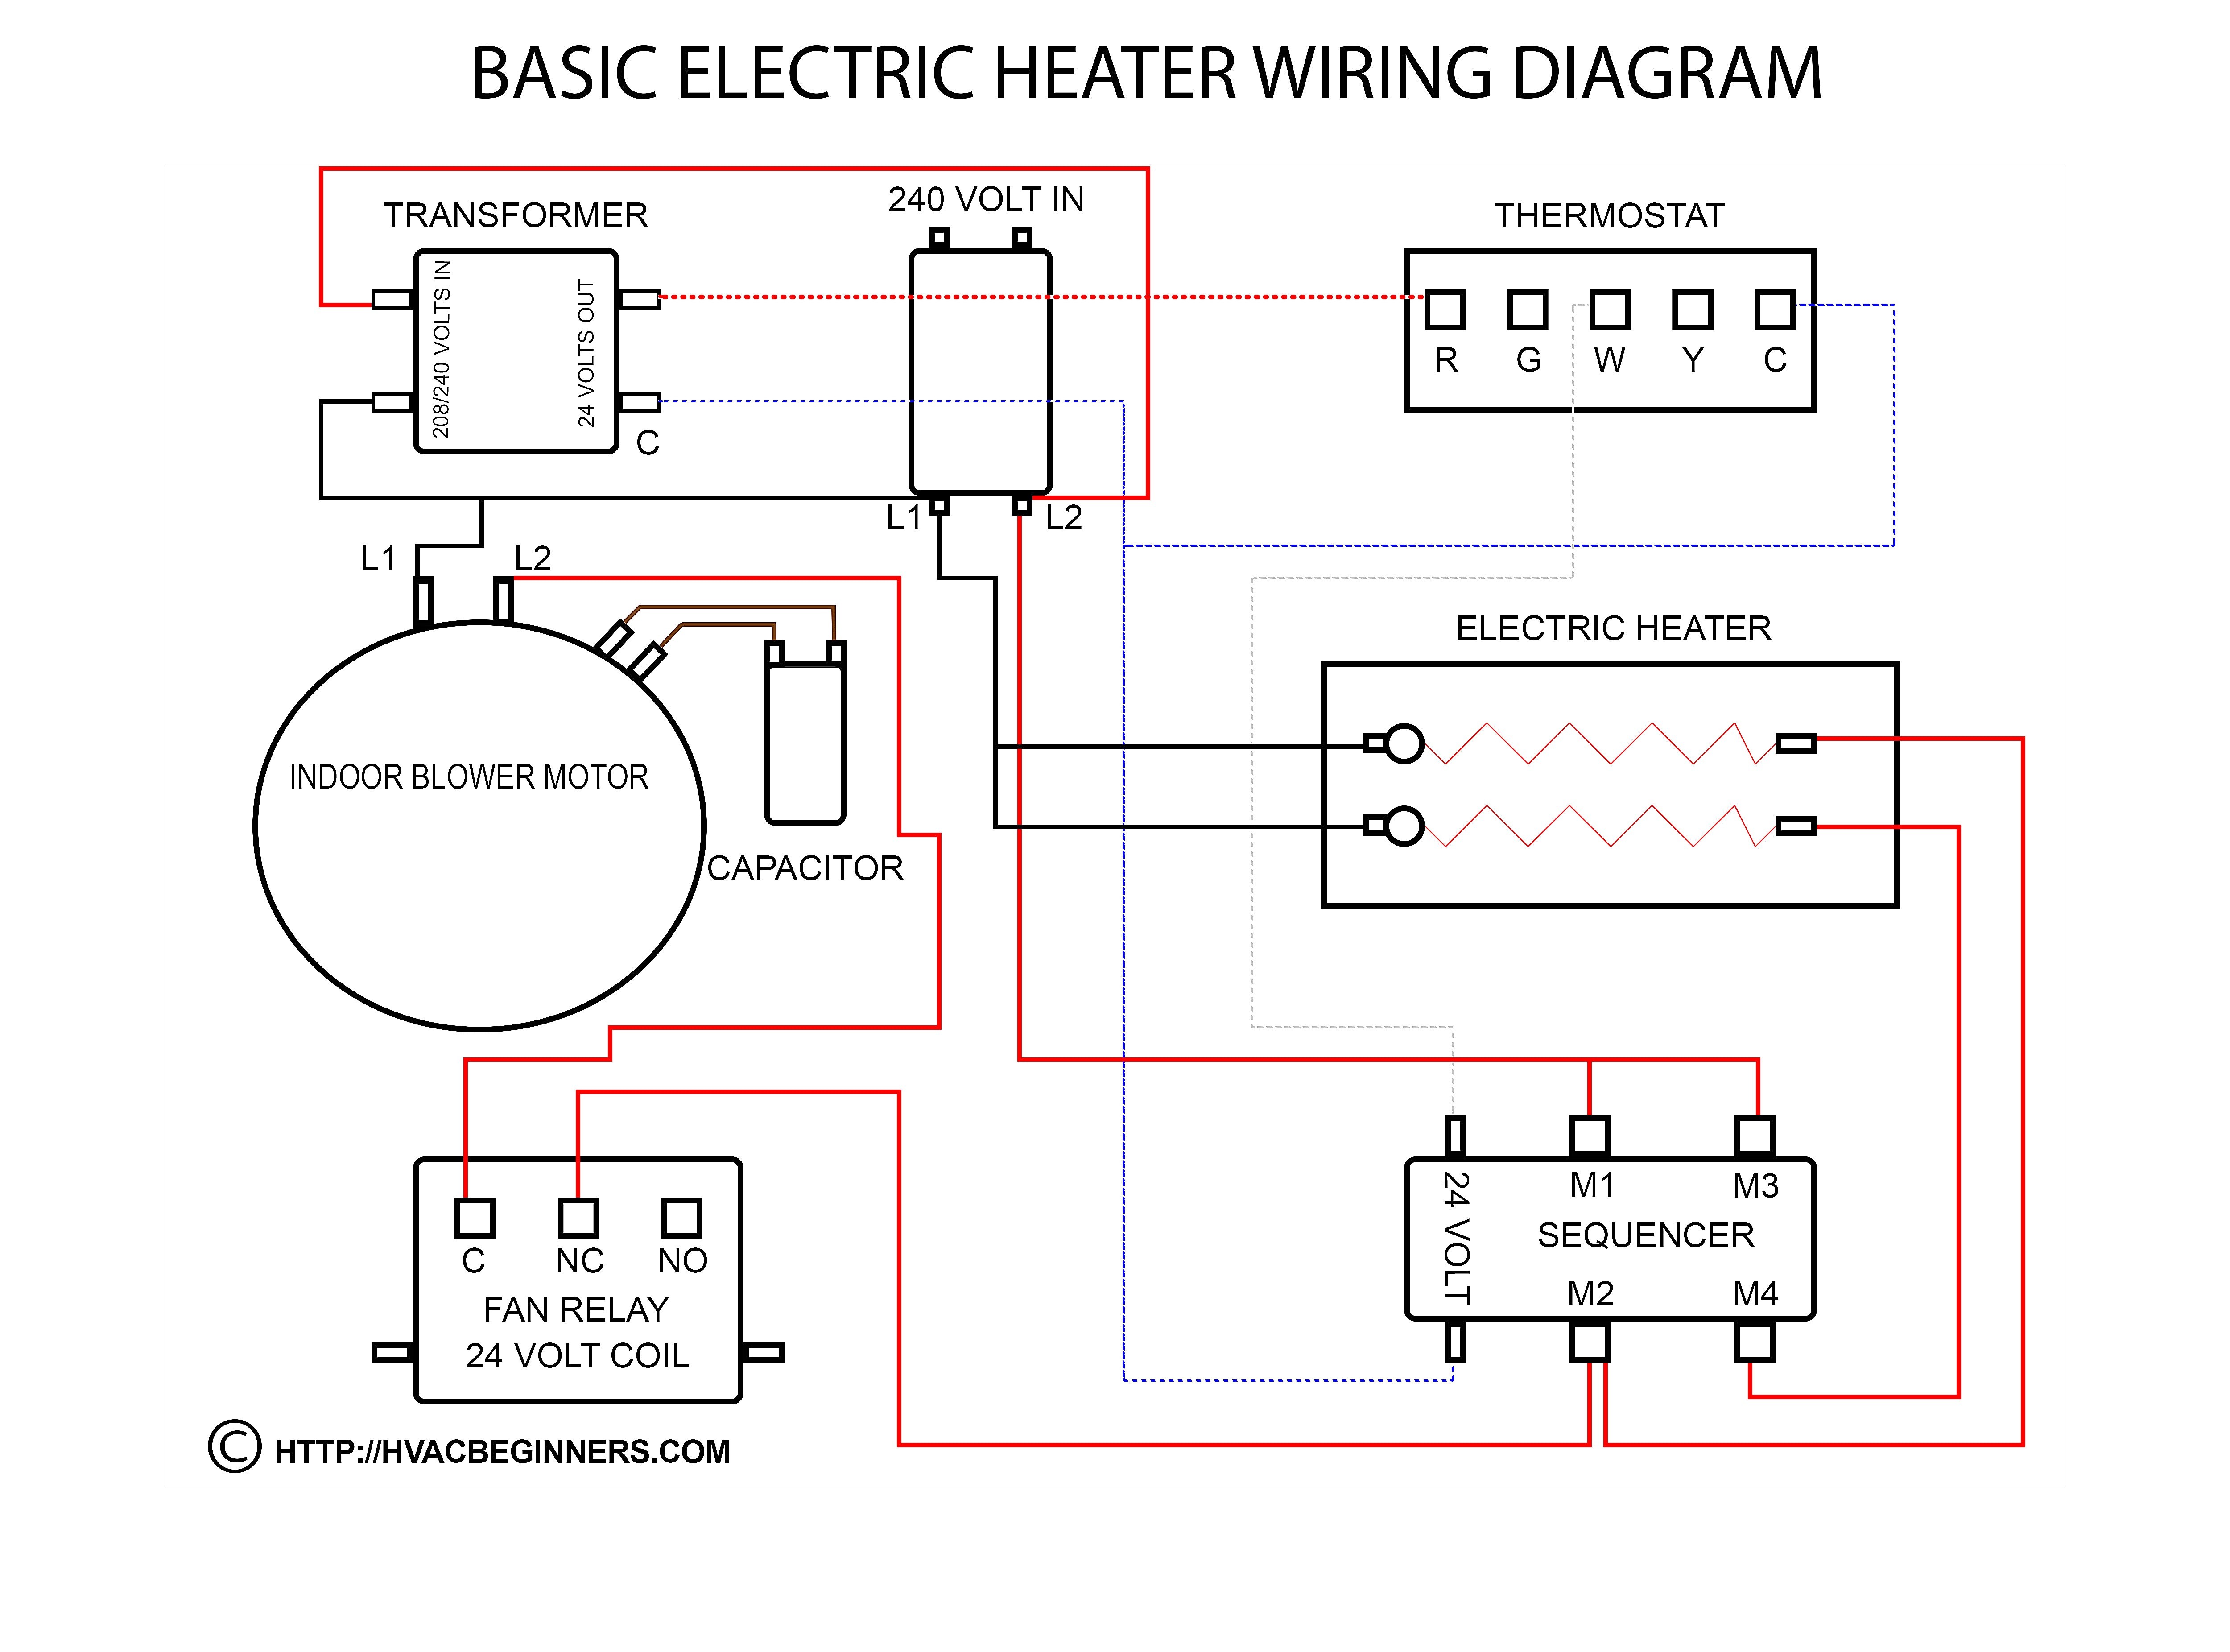 Wiring Diagram For Heating And Cooling Thermostat Simplified Shapes Gas Furnace Thermostat Wiring Diagram Collection